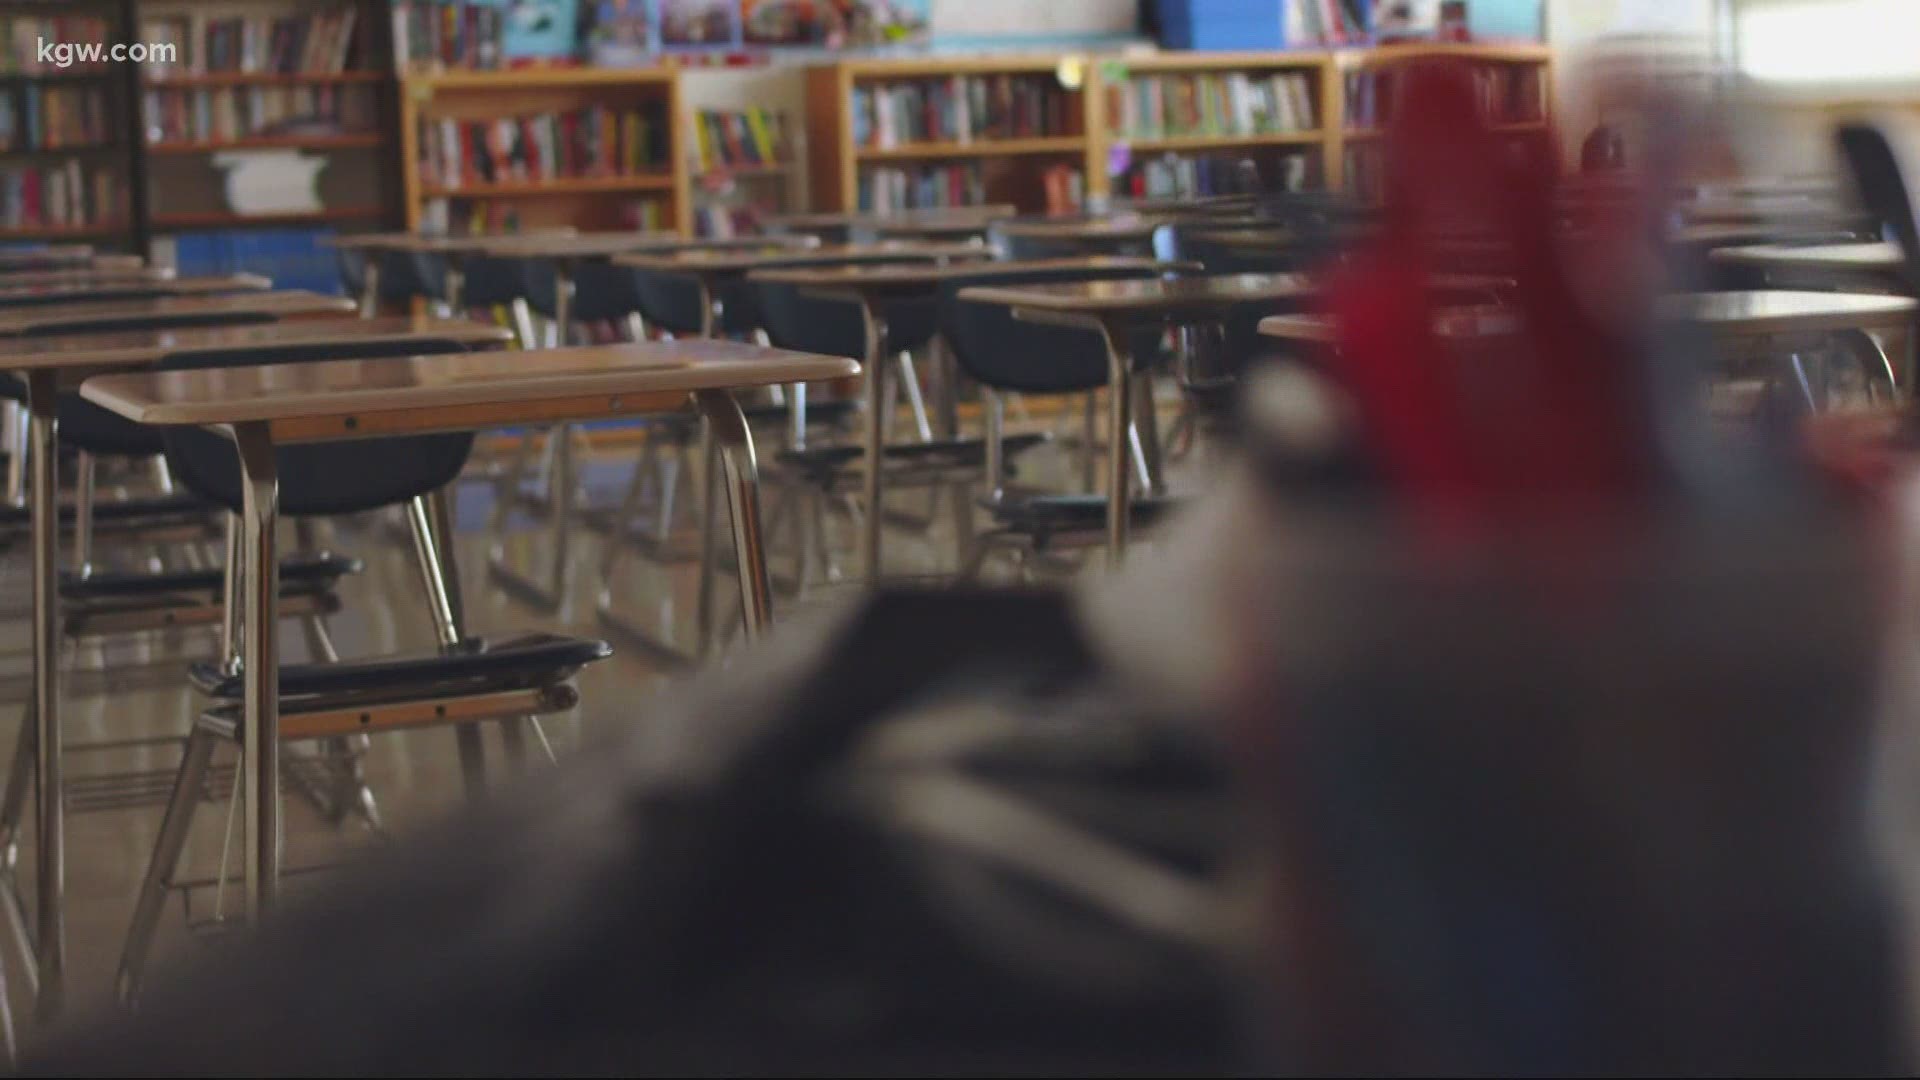 Newly updated metrics for Oregon schools could send as many as 130,000 students back to the classroom. Pat Dooris reports.